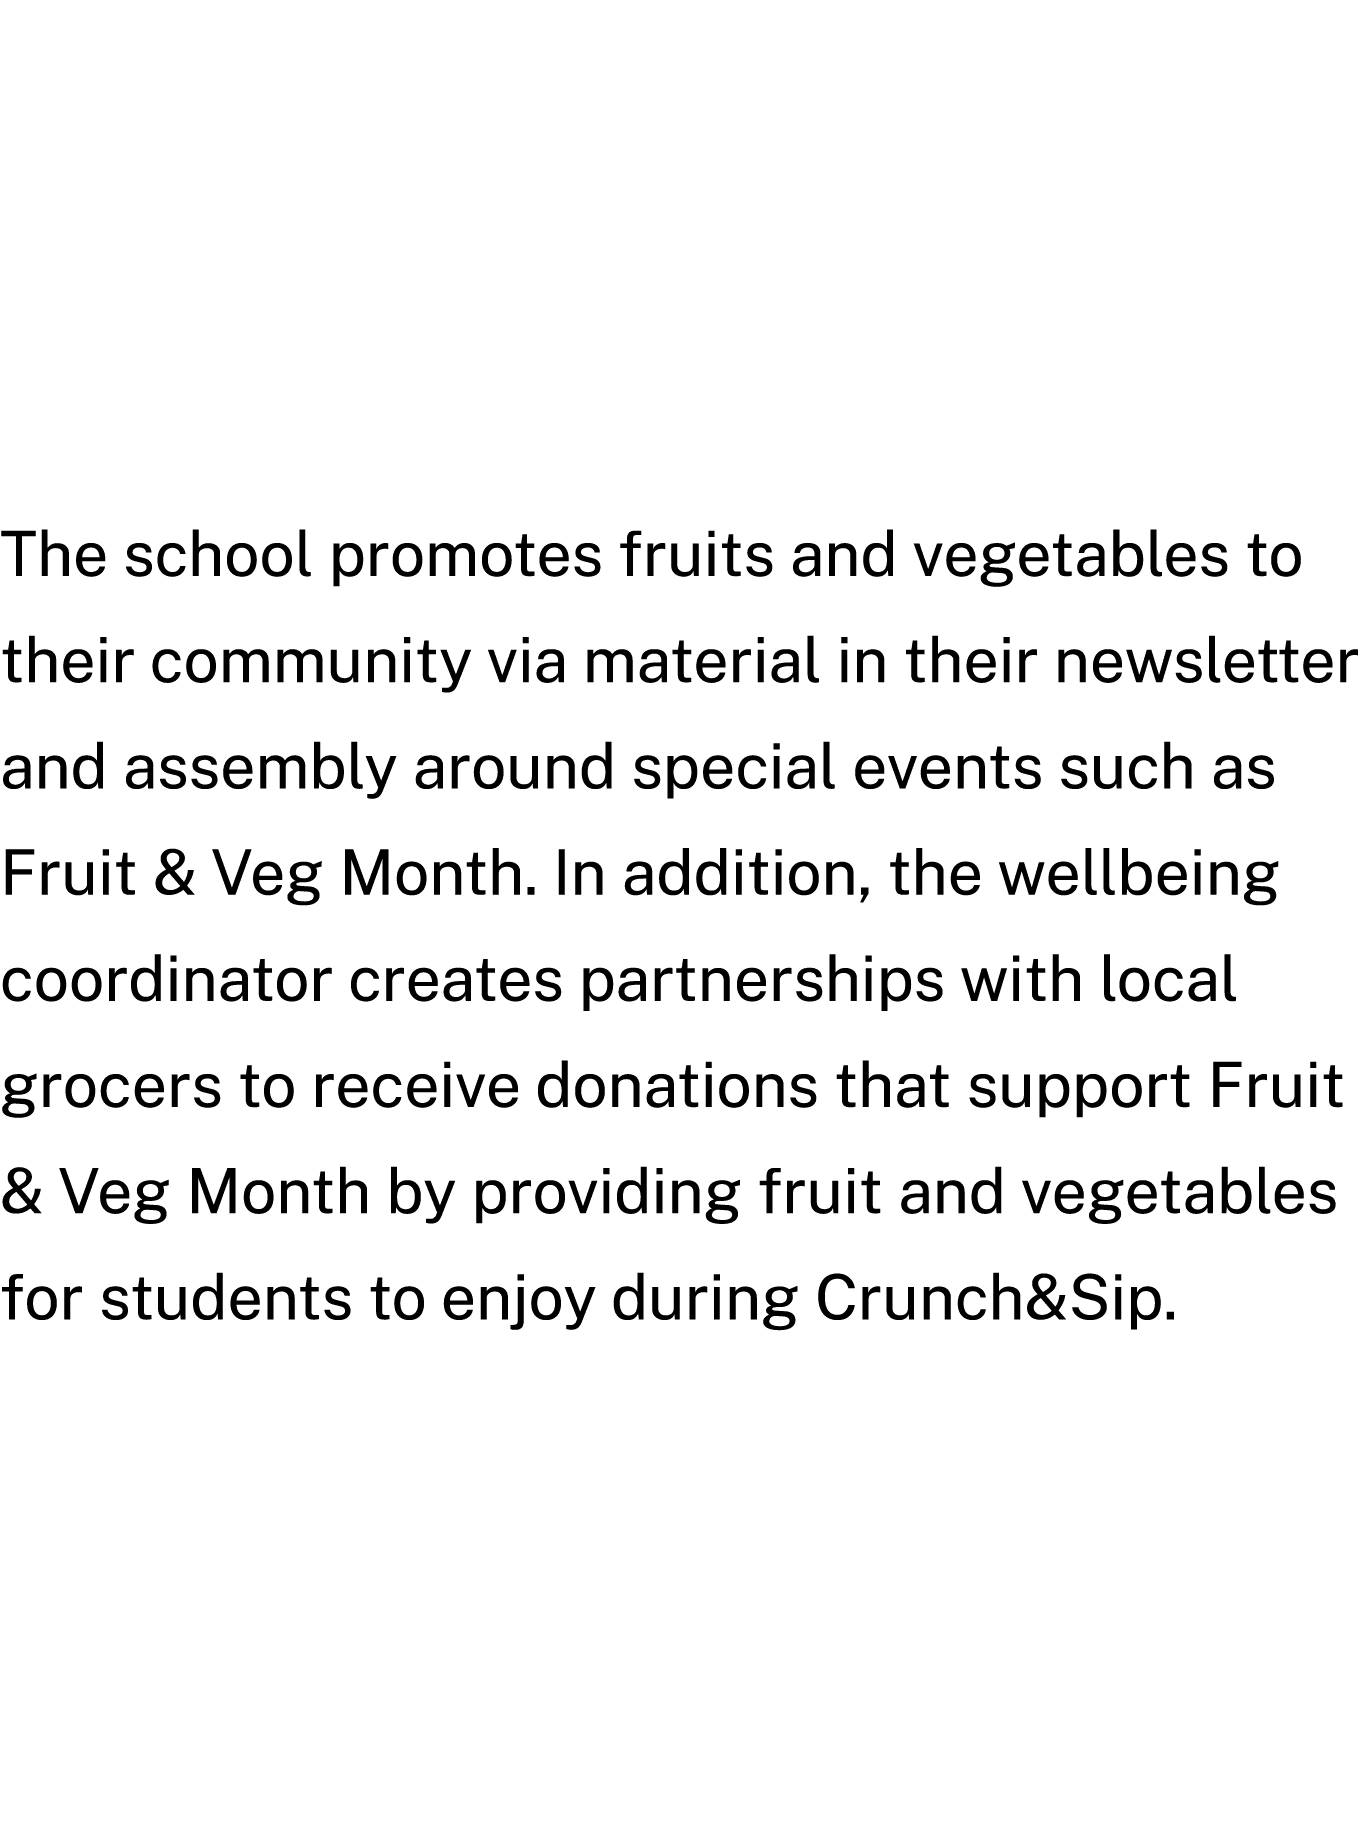 The school promotes fruits and vegetables to their community via material in their newsletter and assembly around spe...